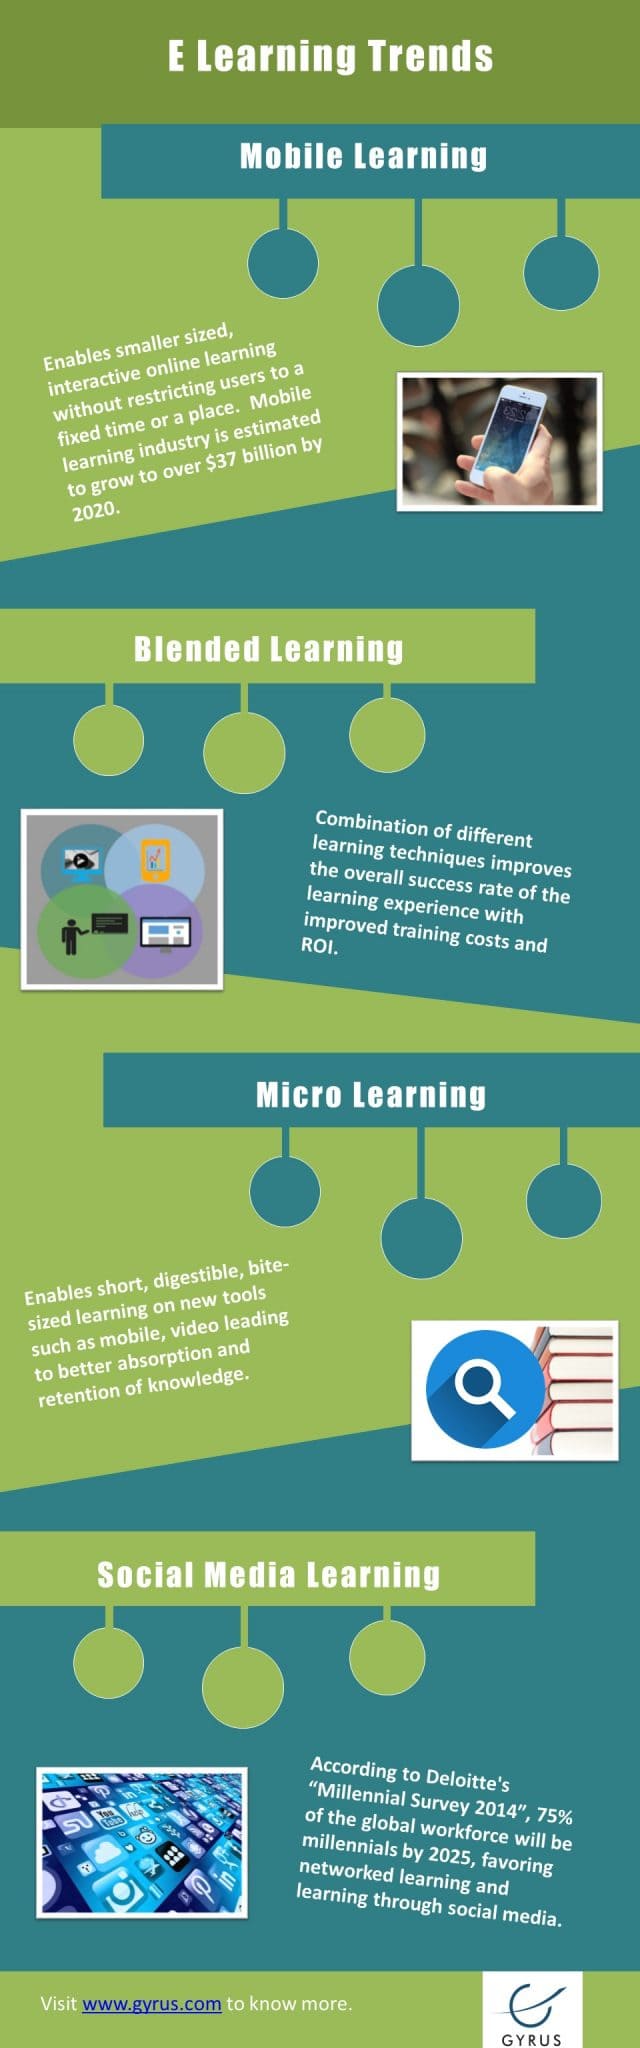 E Learning Trend